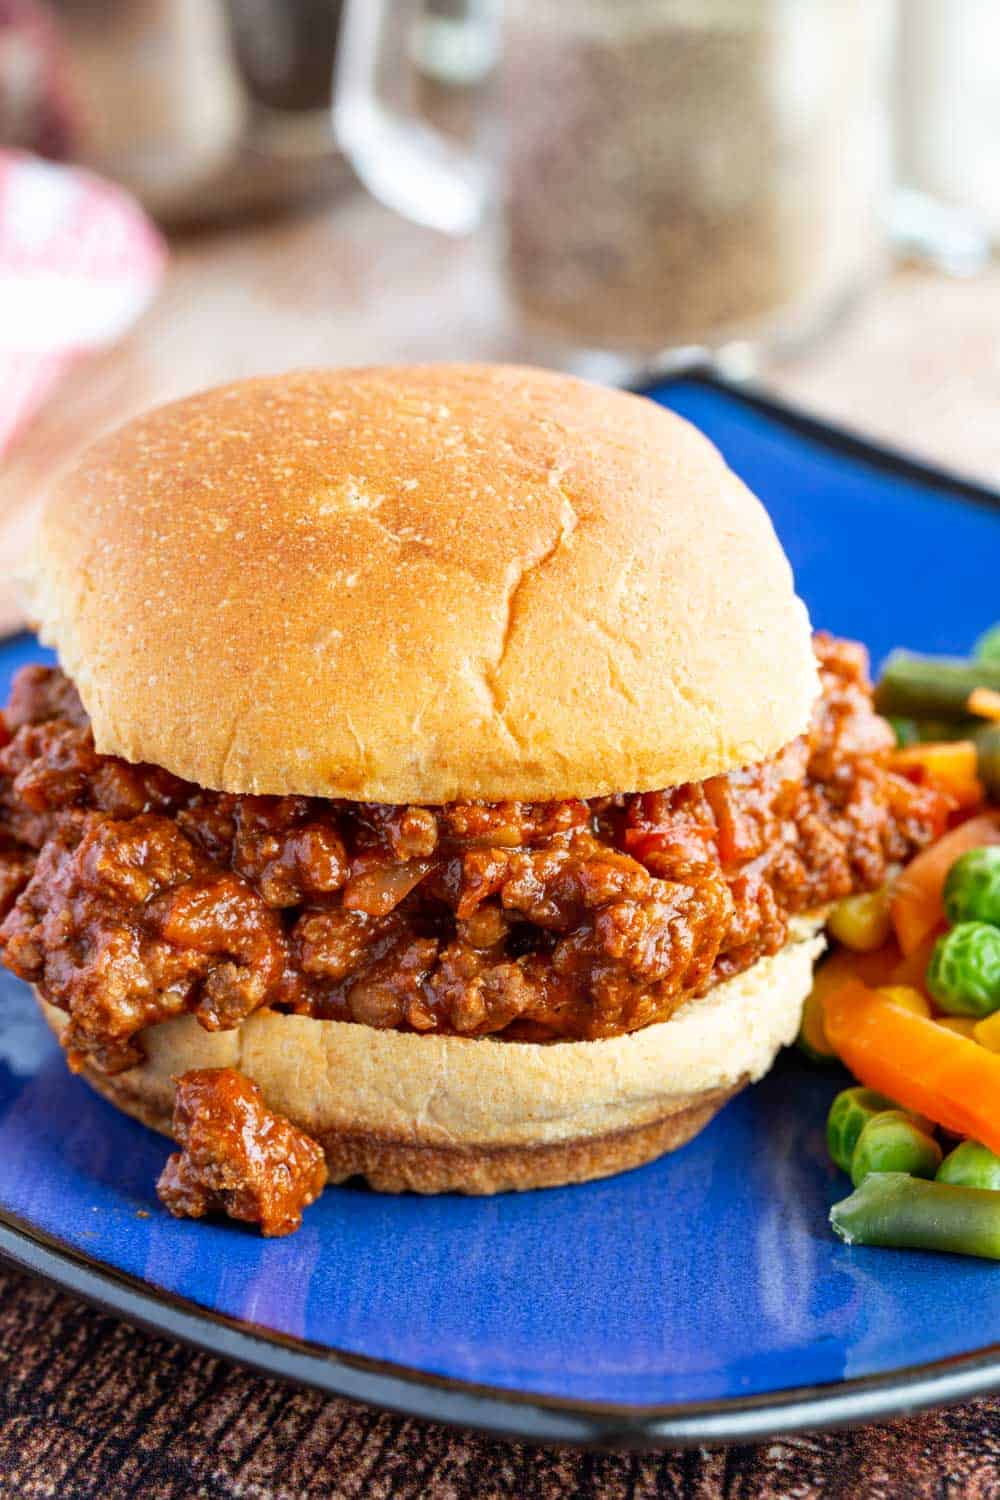 Sloppy joes piled on a bun with mixed veggies on a blue plate.